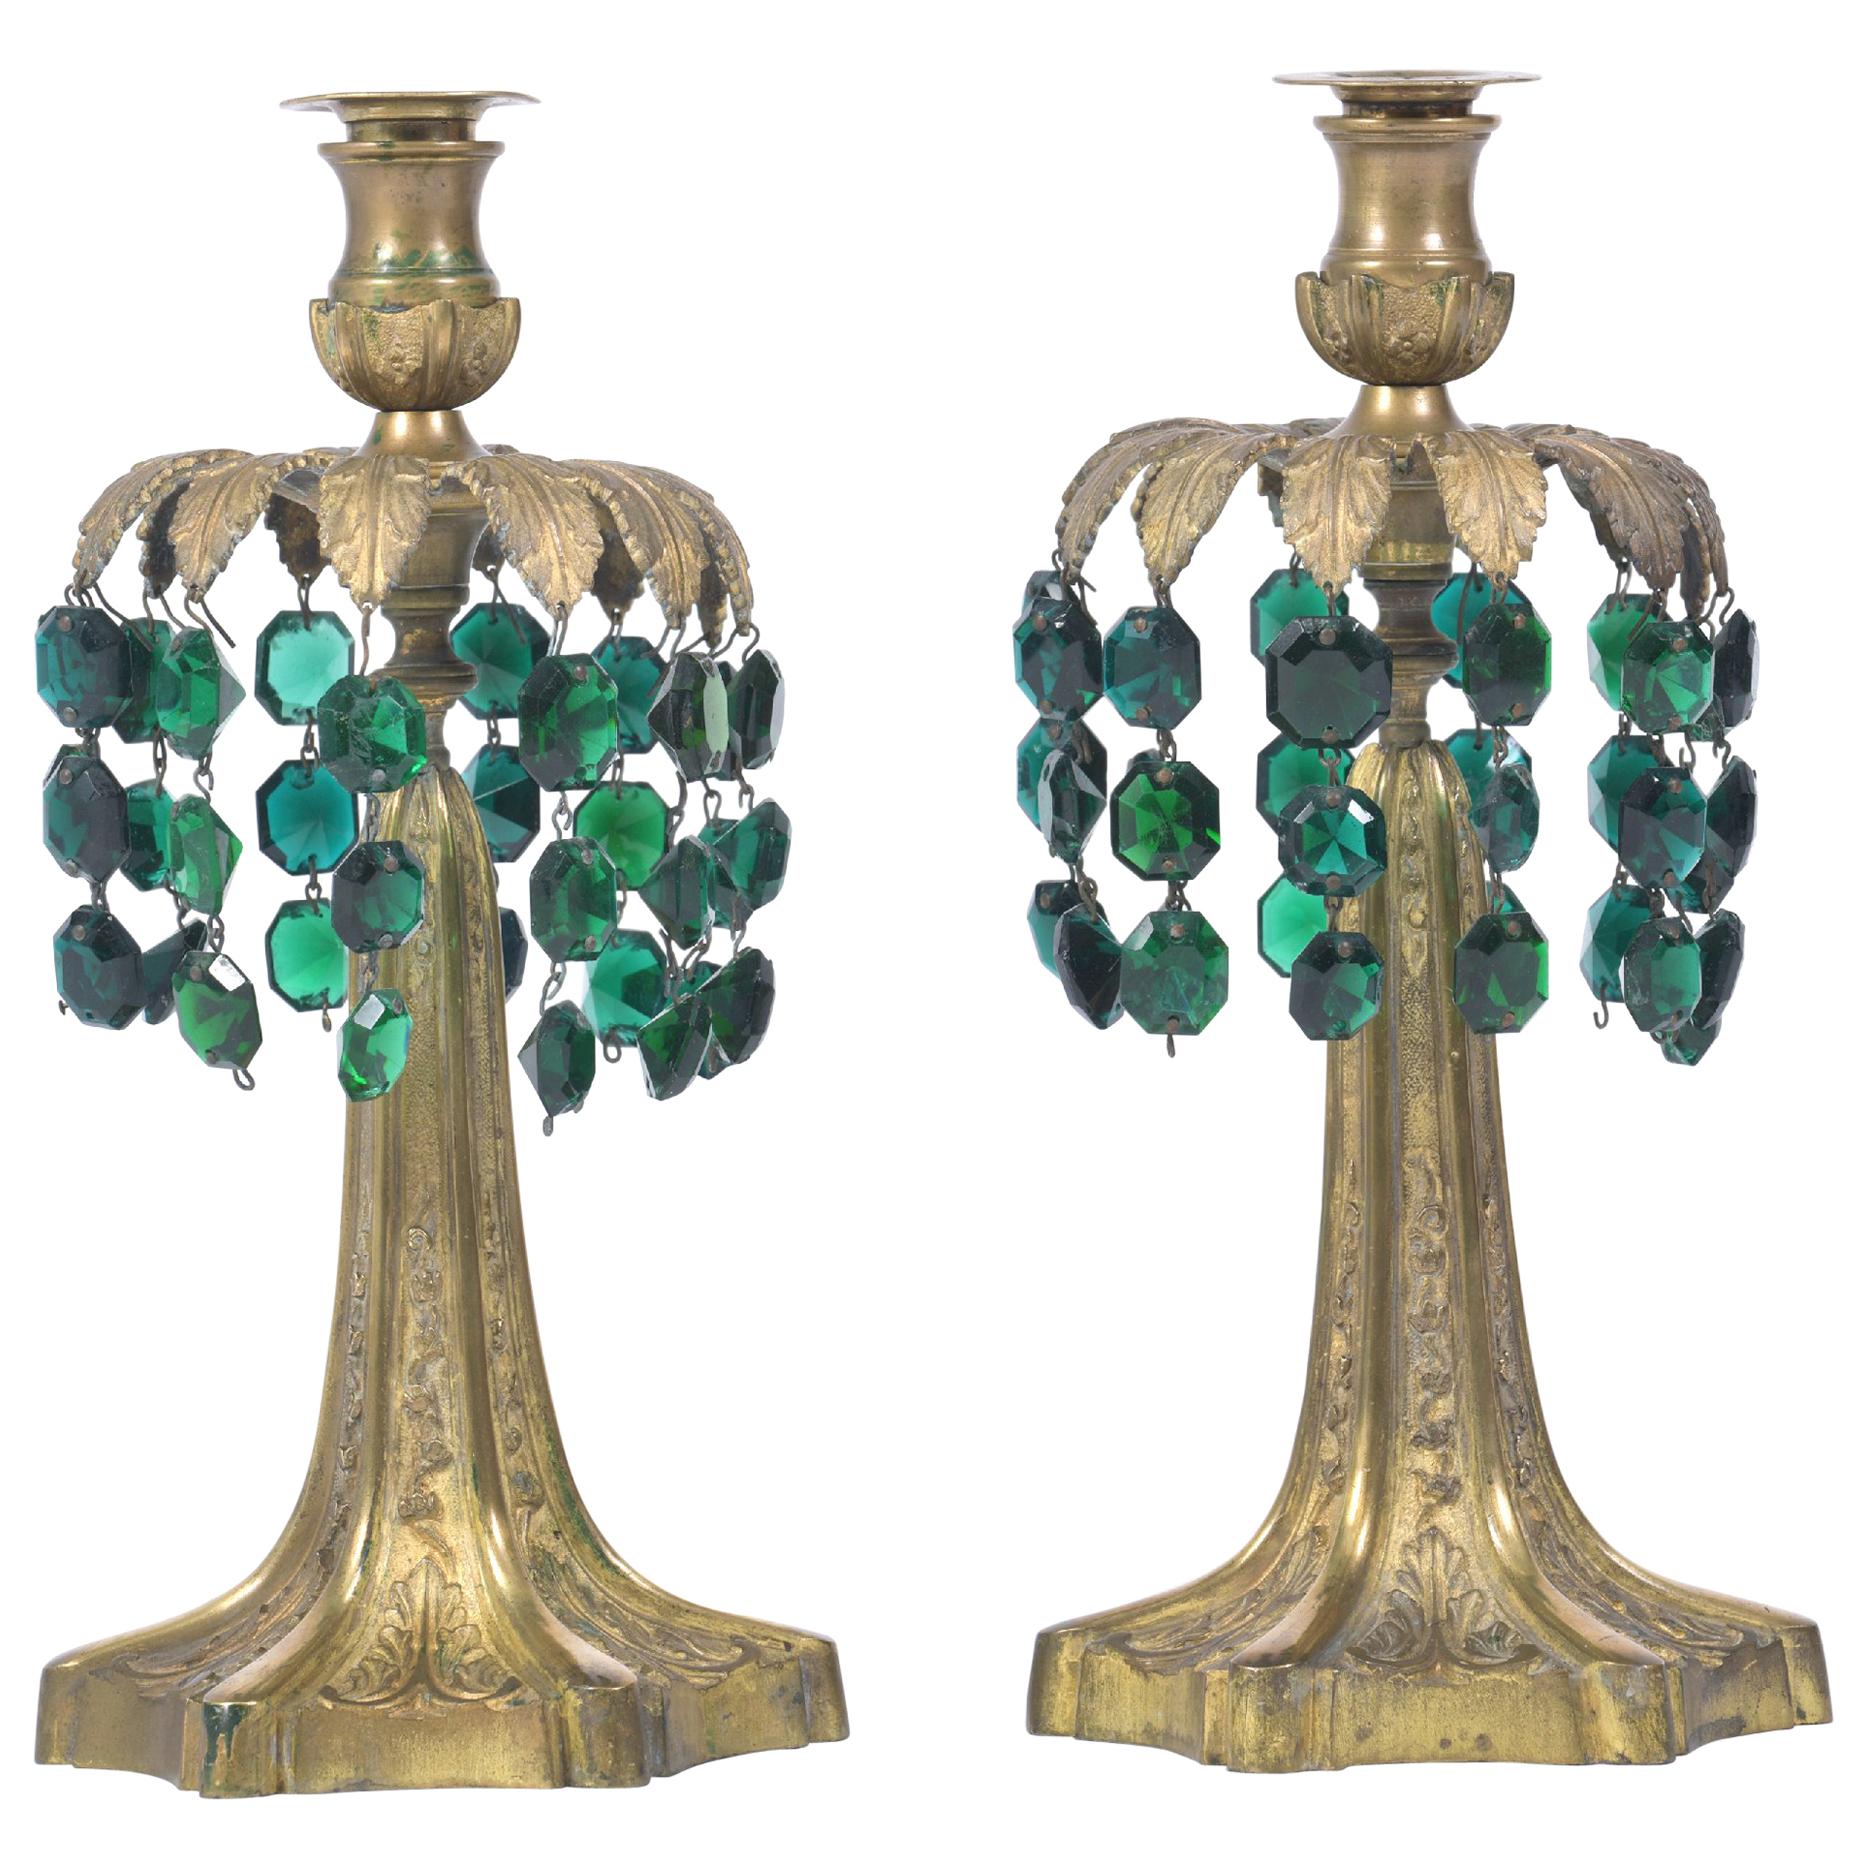 Early 20th Century Pair of Brass Candlesticks with Green Crystal Drops